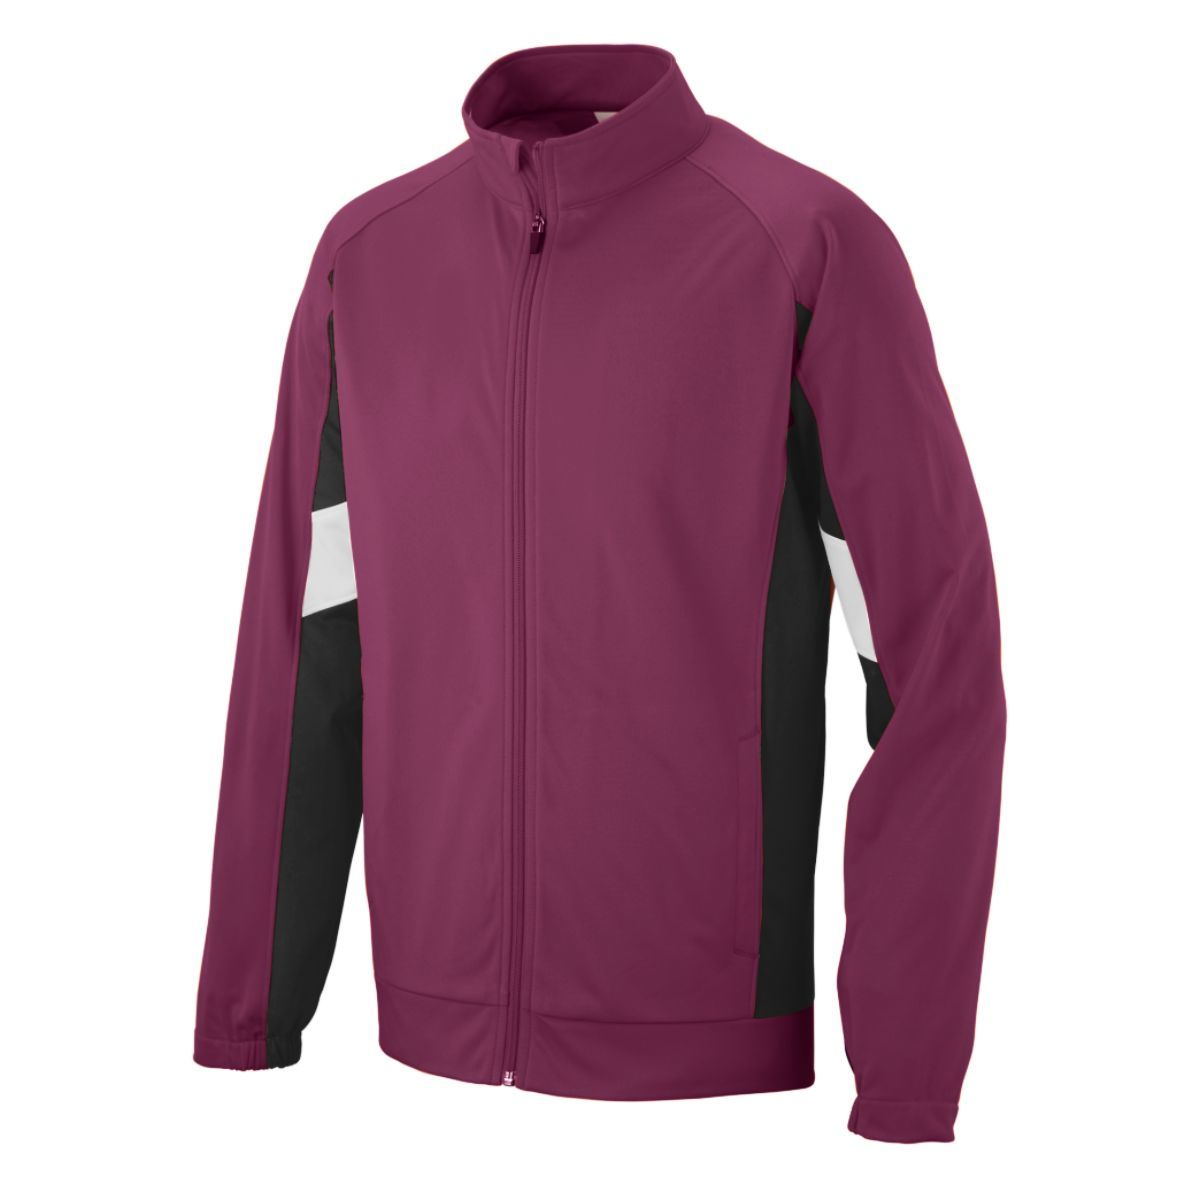 Augusta Sportswear Youth Tour De Force Jacket in Maroon/Black/White  -Part of the Youth, Youth-Jacket, Augusta-Products, Outerwear product lines at KanaleyCreations.com